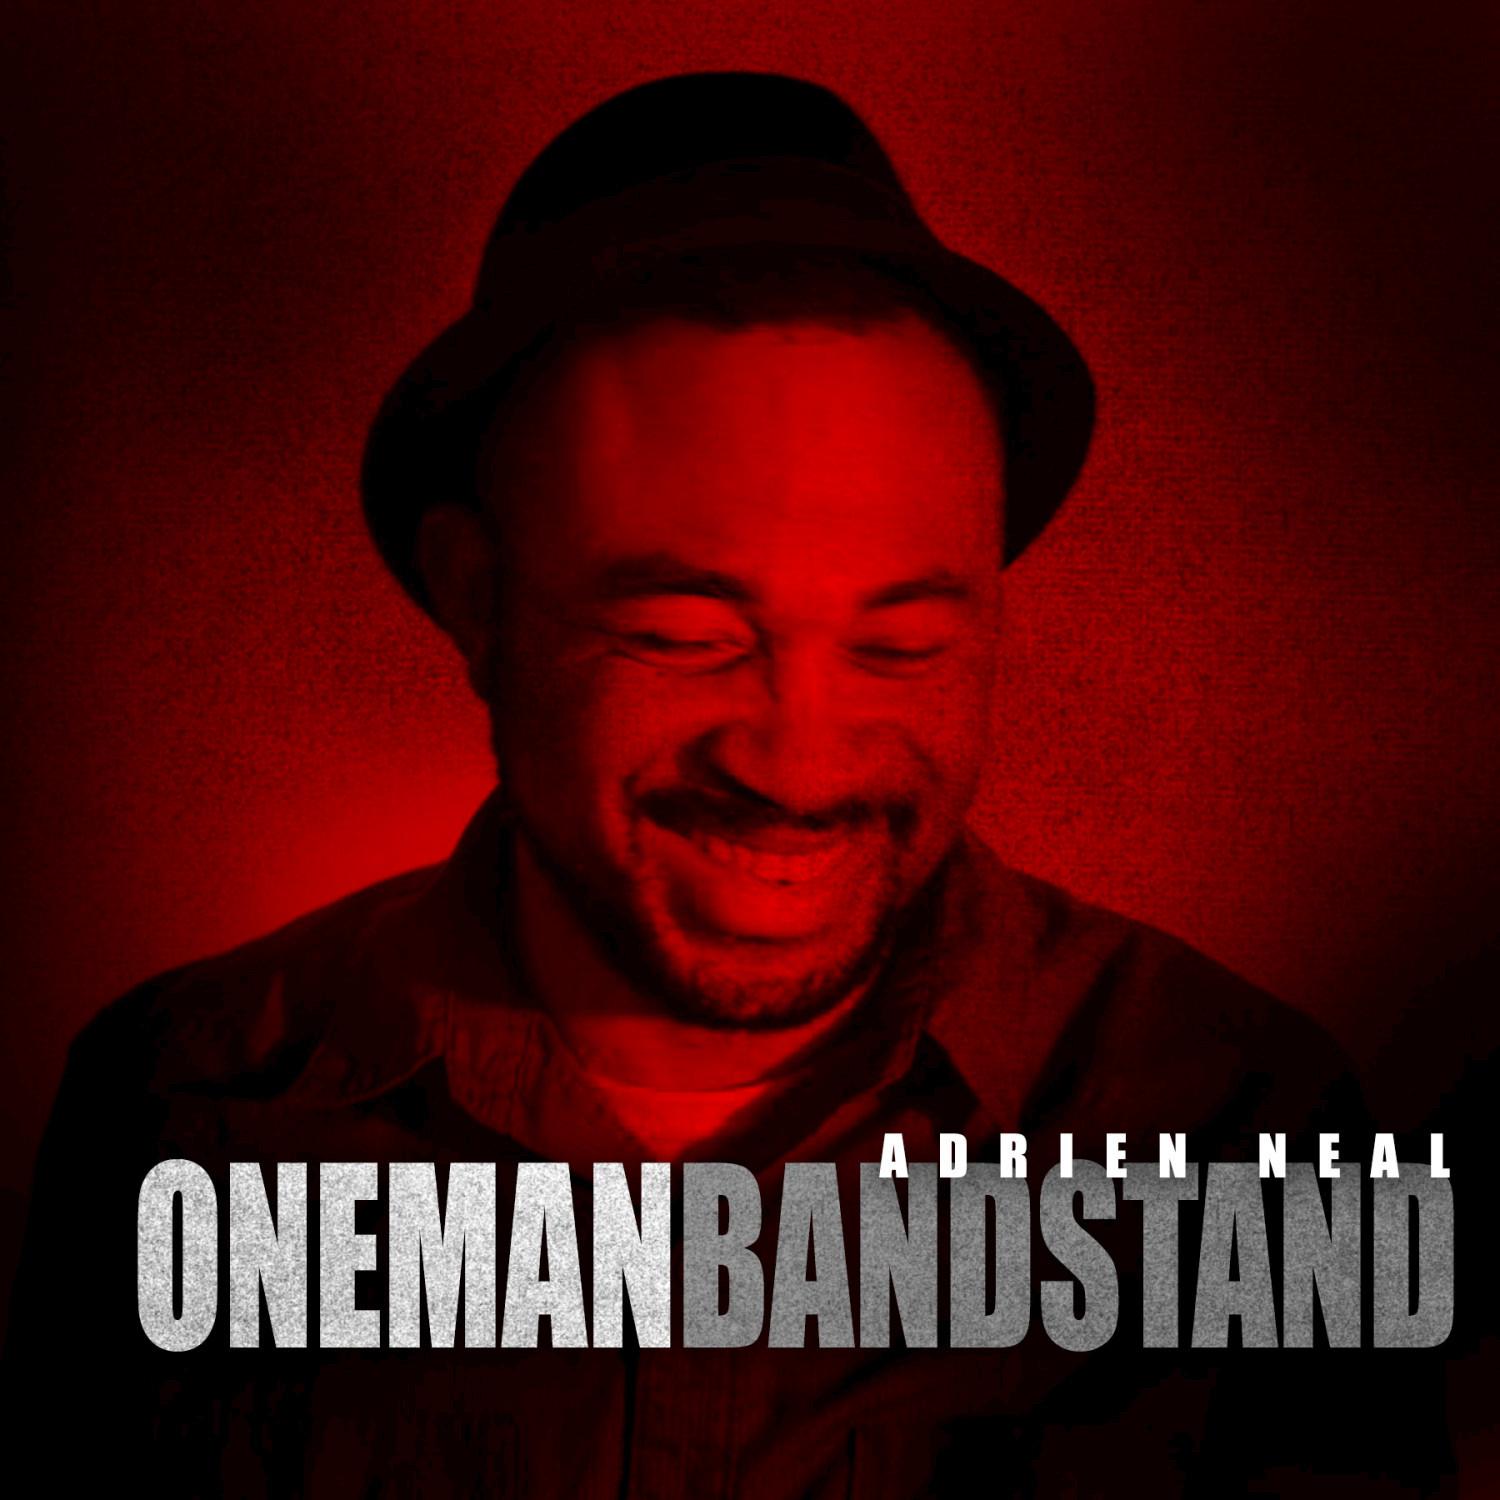 One Man Band Stand